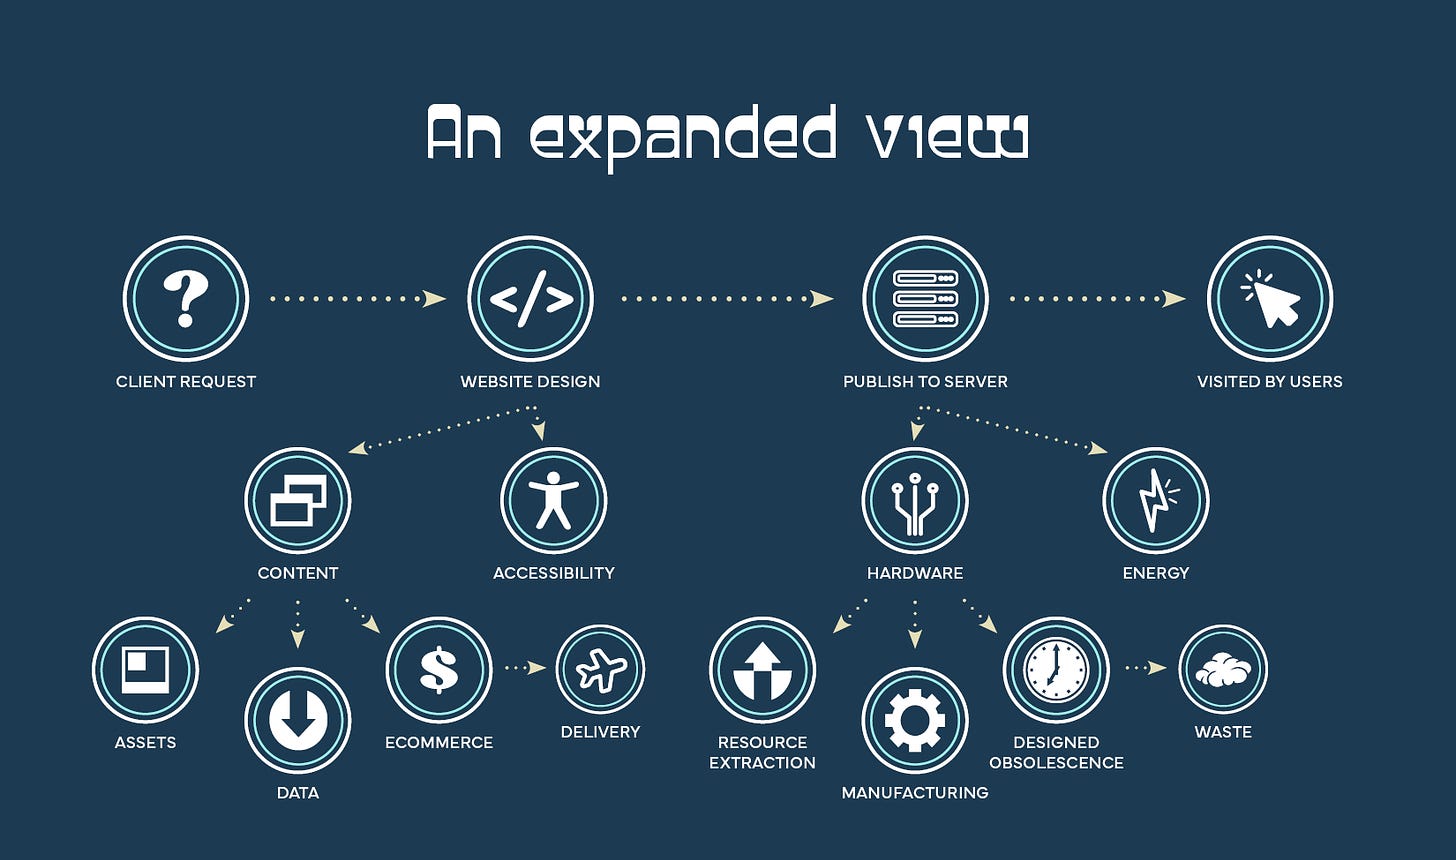 An expanded view of the web design process